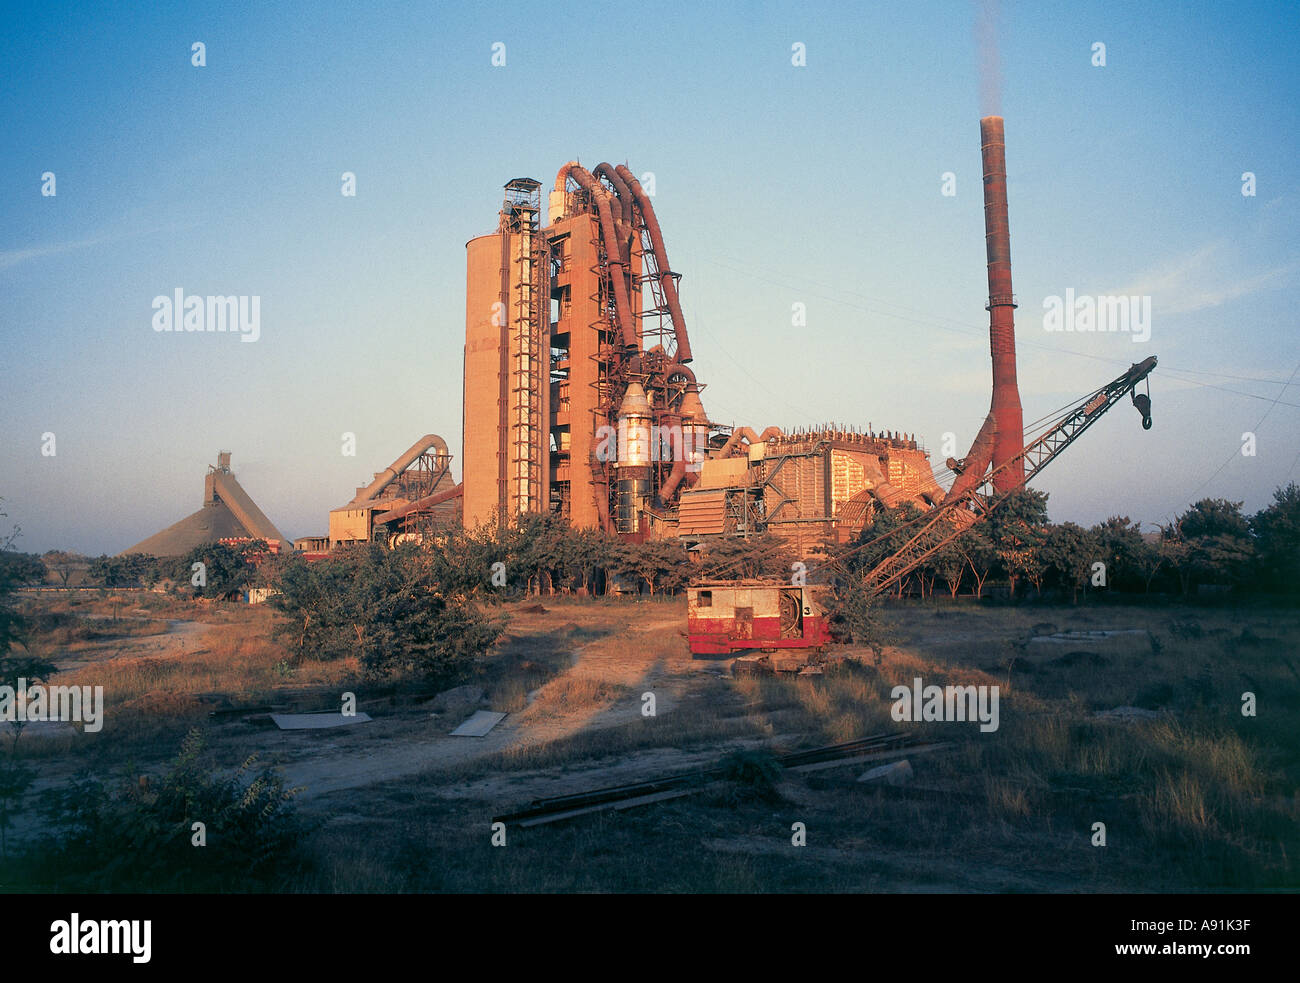 Cement Factory India High Resolution Stock Photography and Images - Alamy